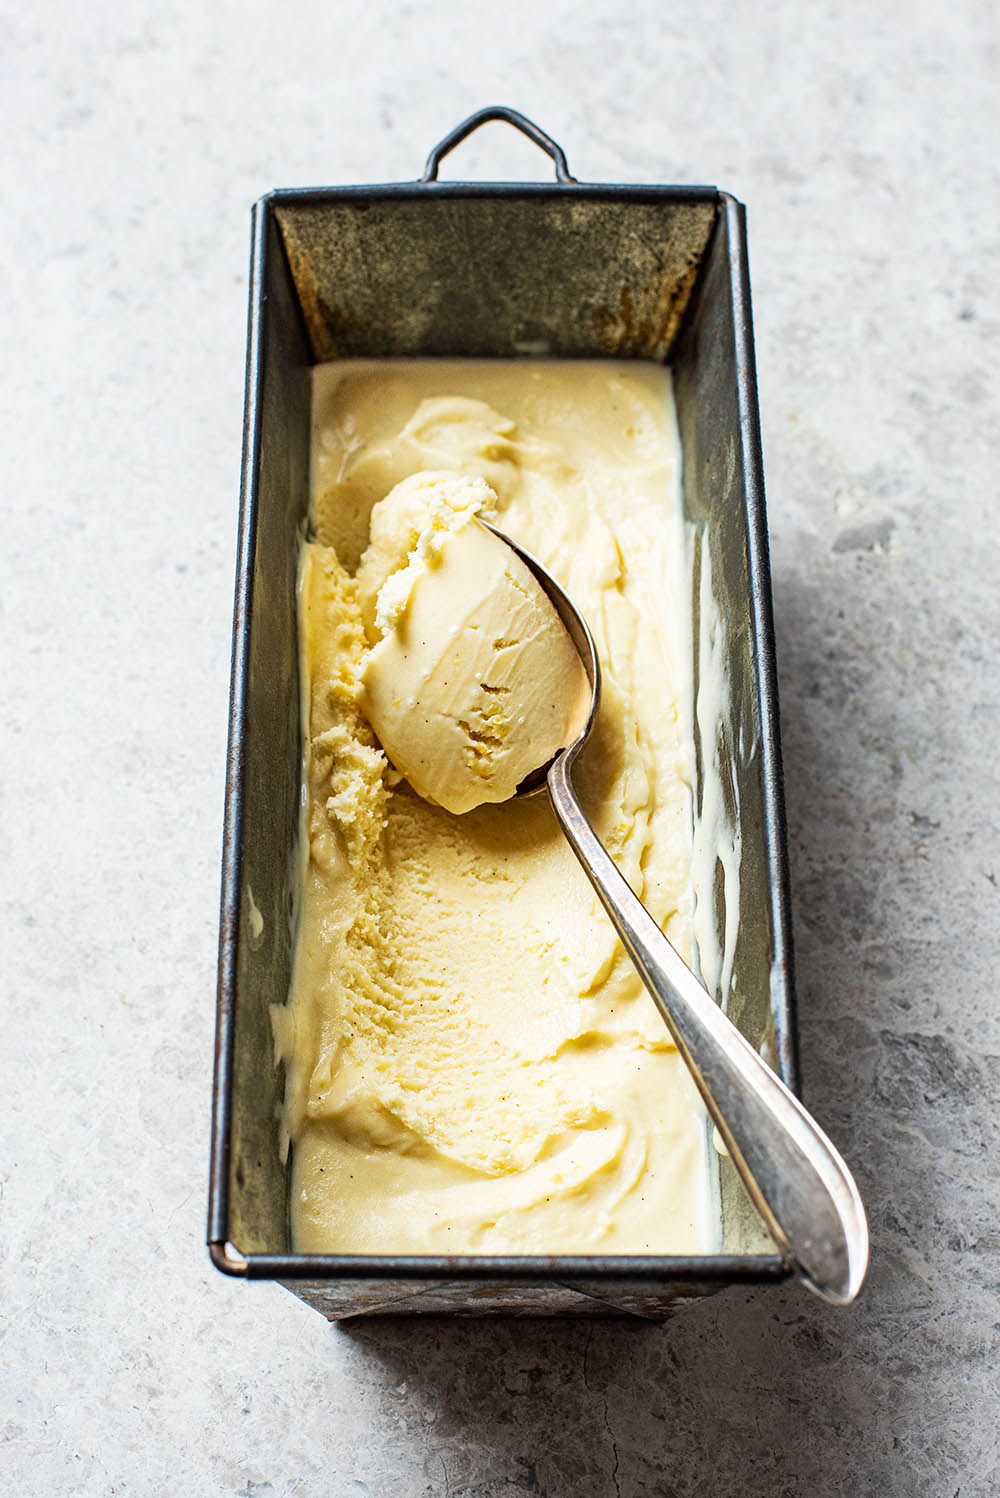 An old silver spoon in the tin with ice cream.